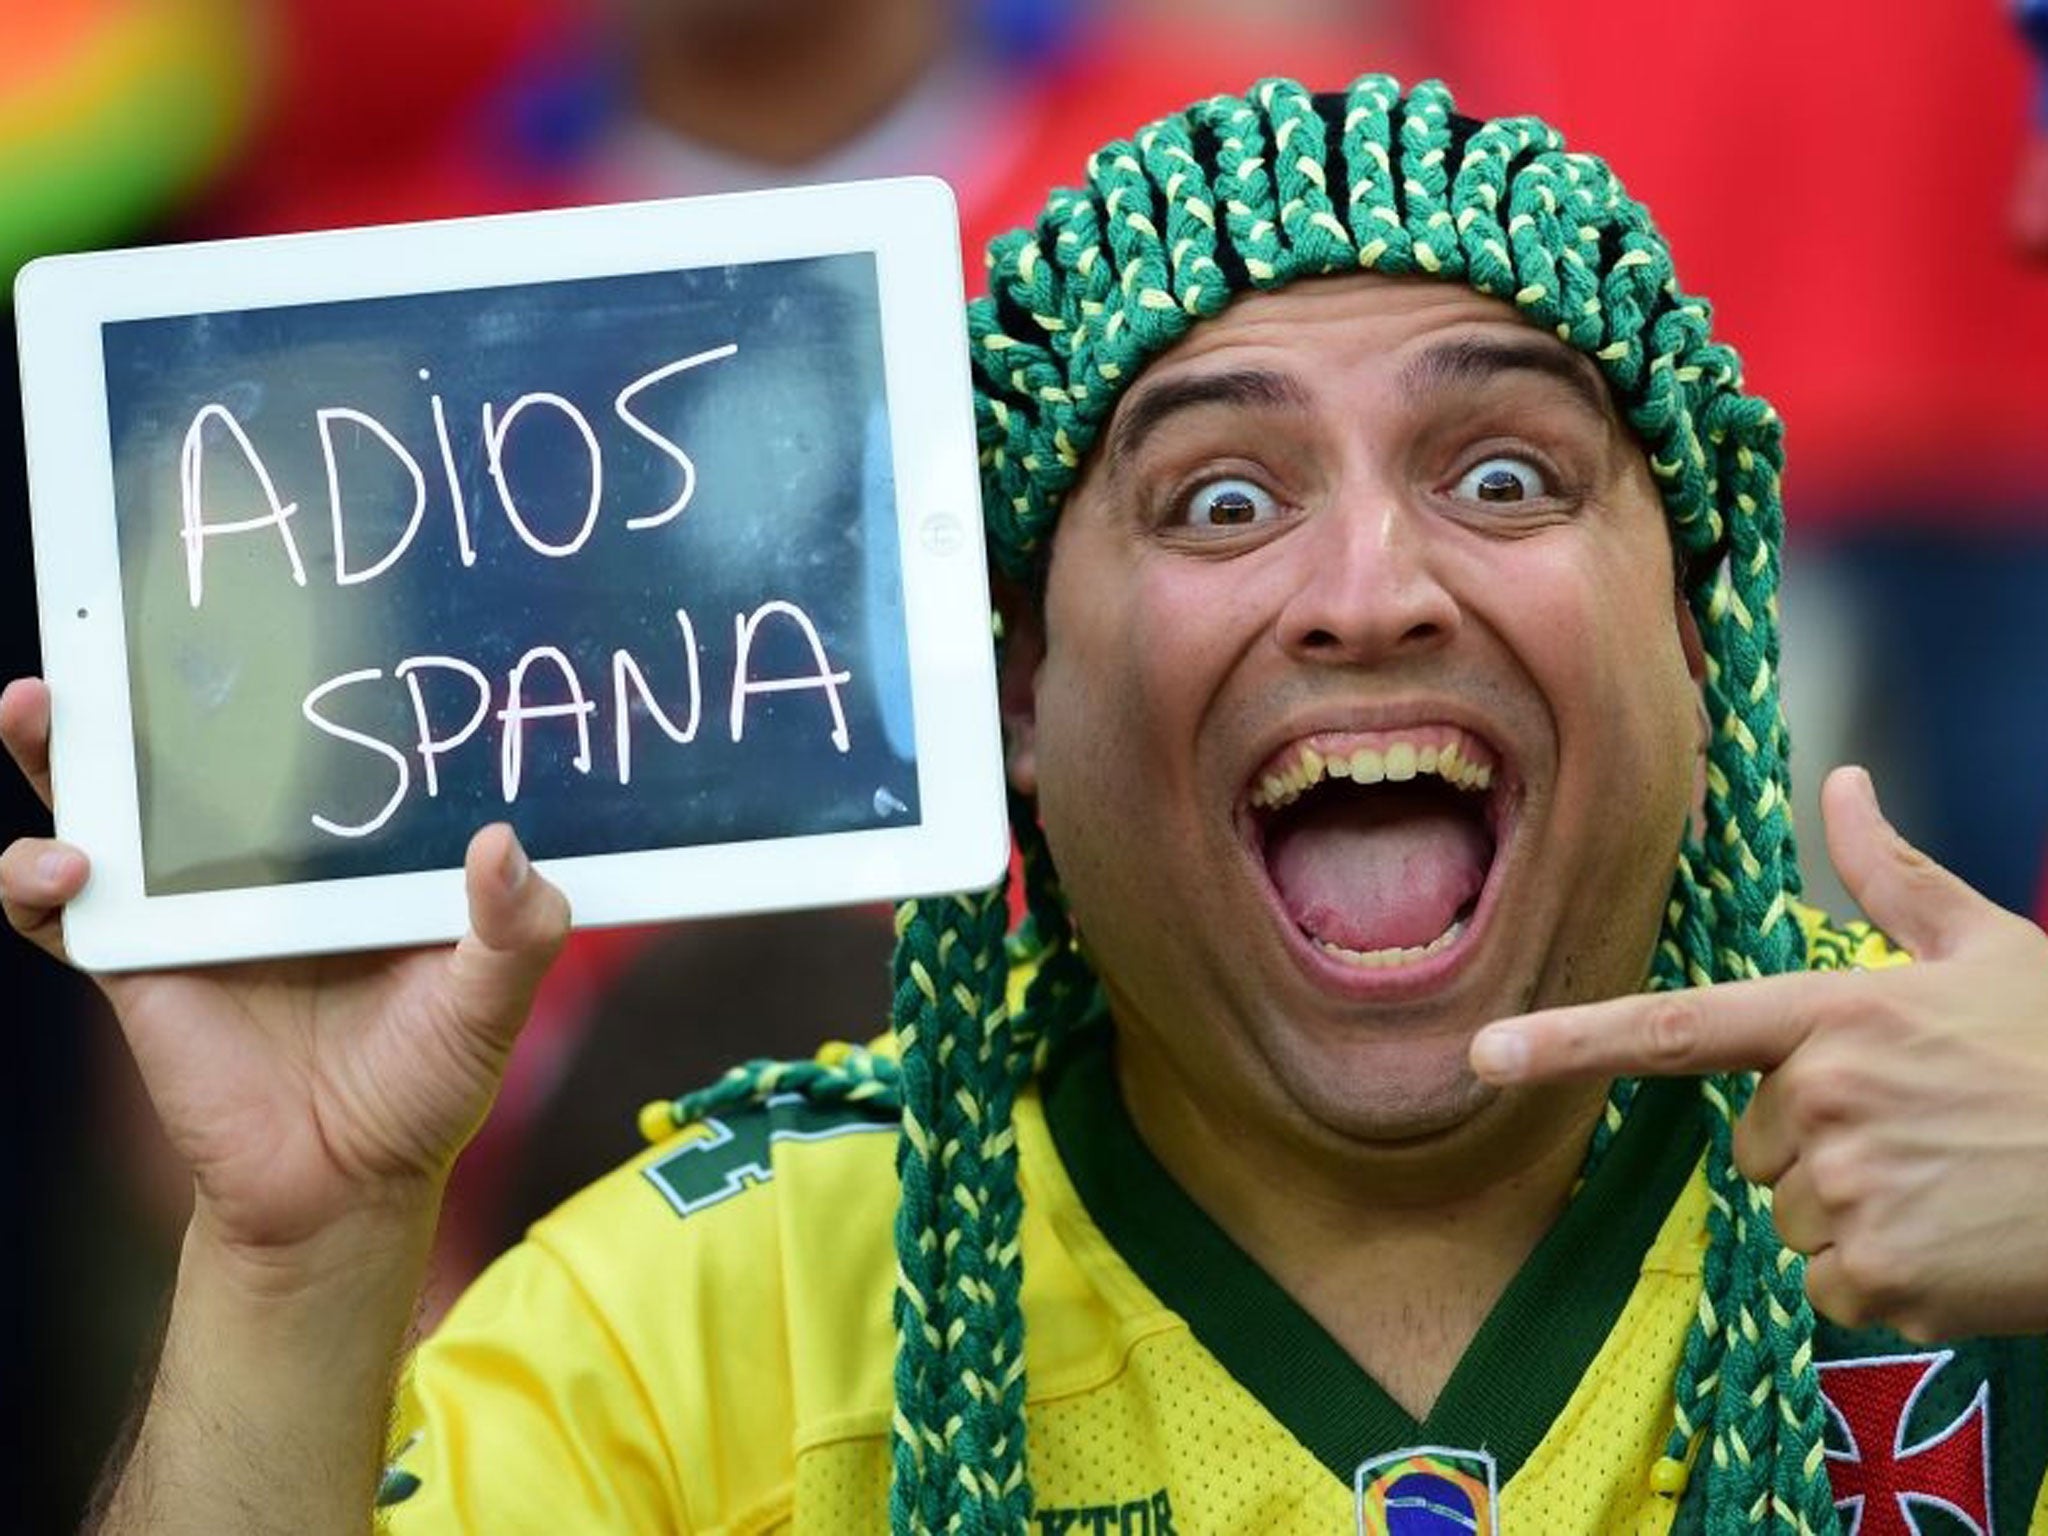 A Chile fans holds a sign reading in Spanish "Goodbye Spain" after Spain lost their Group B football match against Chile in the Maracana Stadium in Rio de Janeiro during the 2014 FIFA World Cup on June 18, 2014.